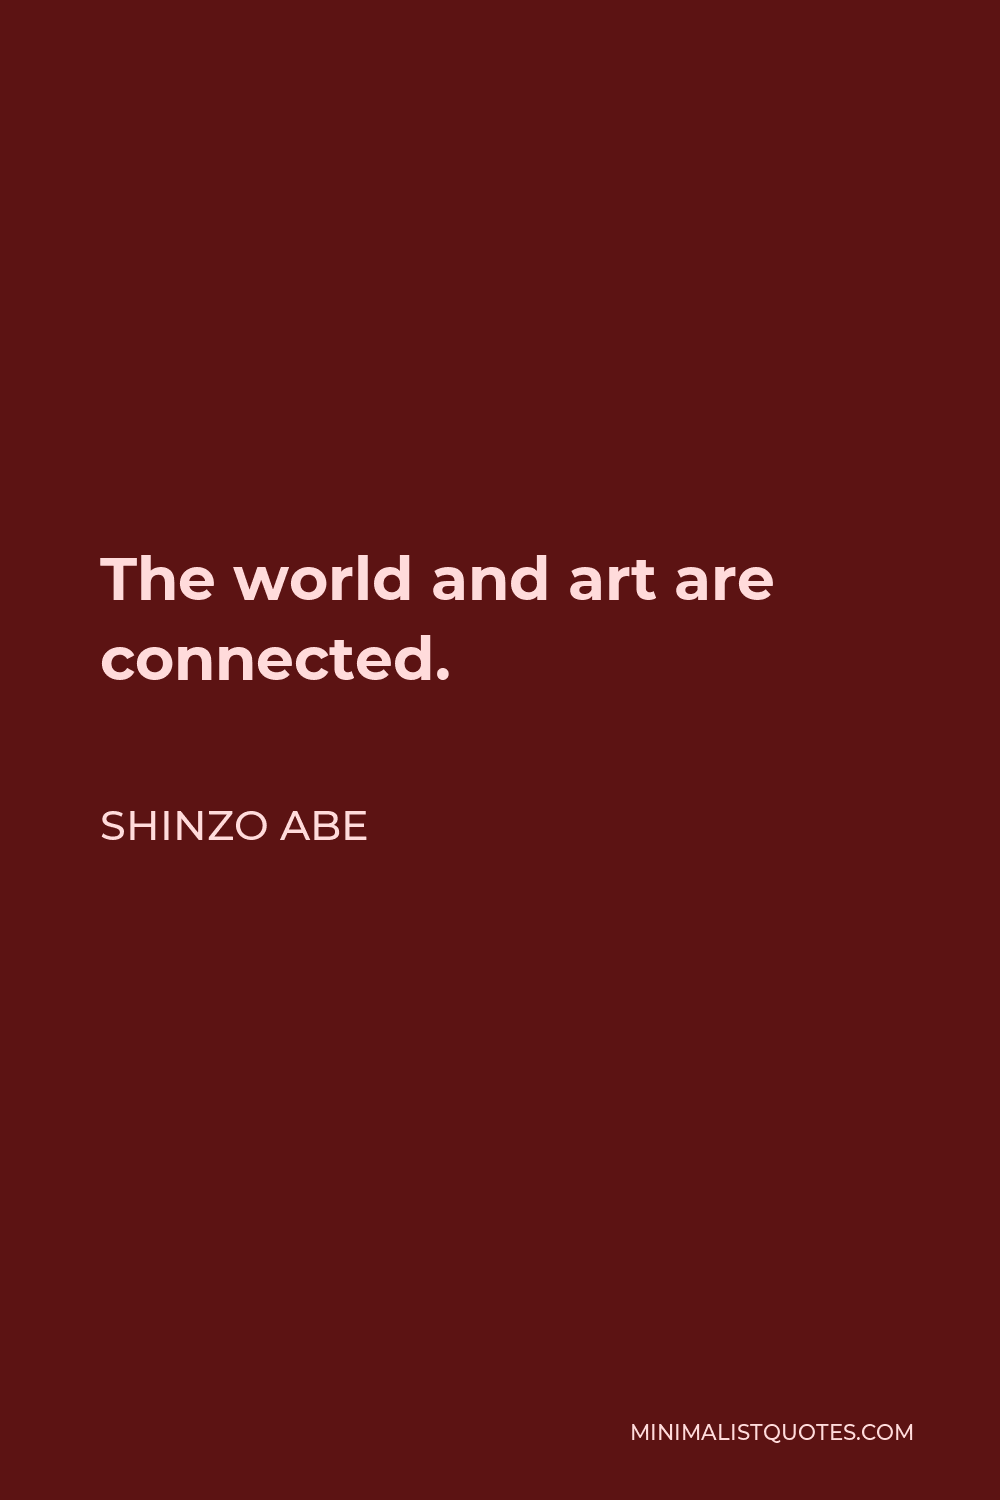 Shinzo Abe Quote - The world and art are connected.